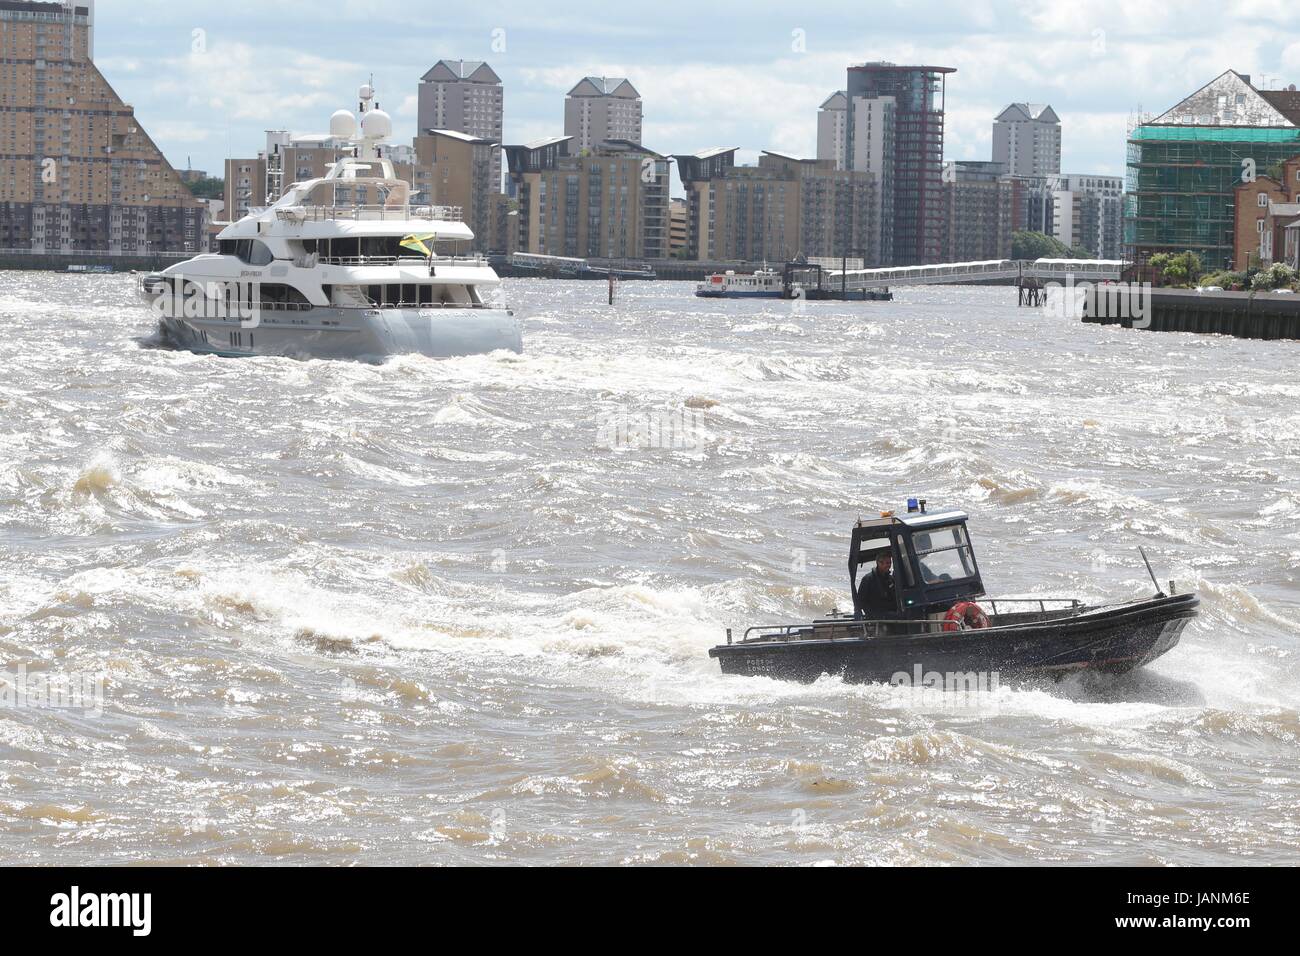 Port of London Authority launch on a choppy River Thames Stock Photo